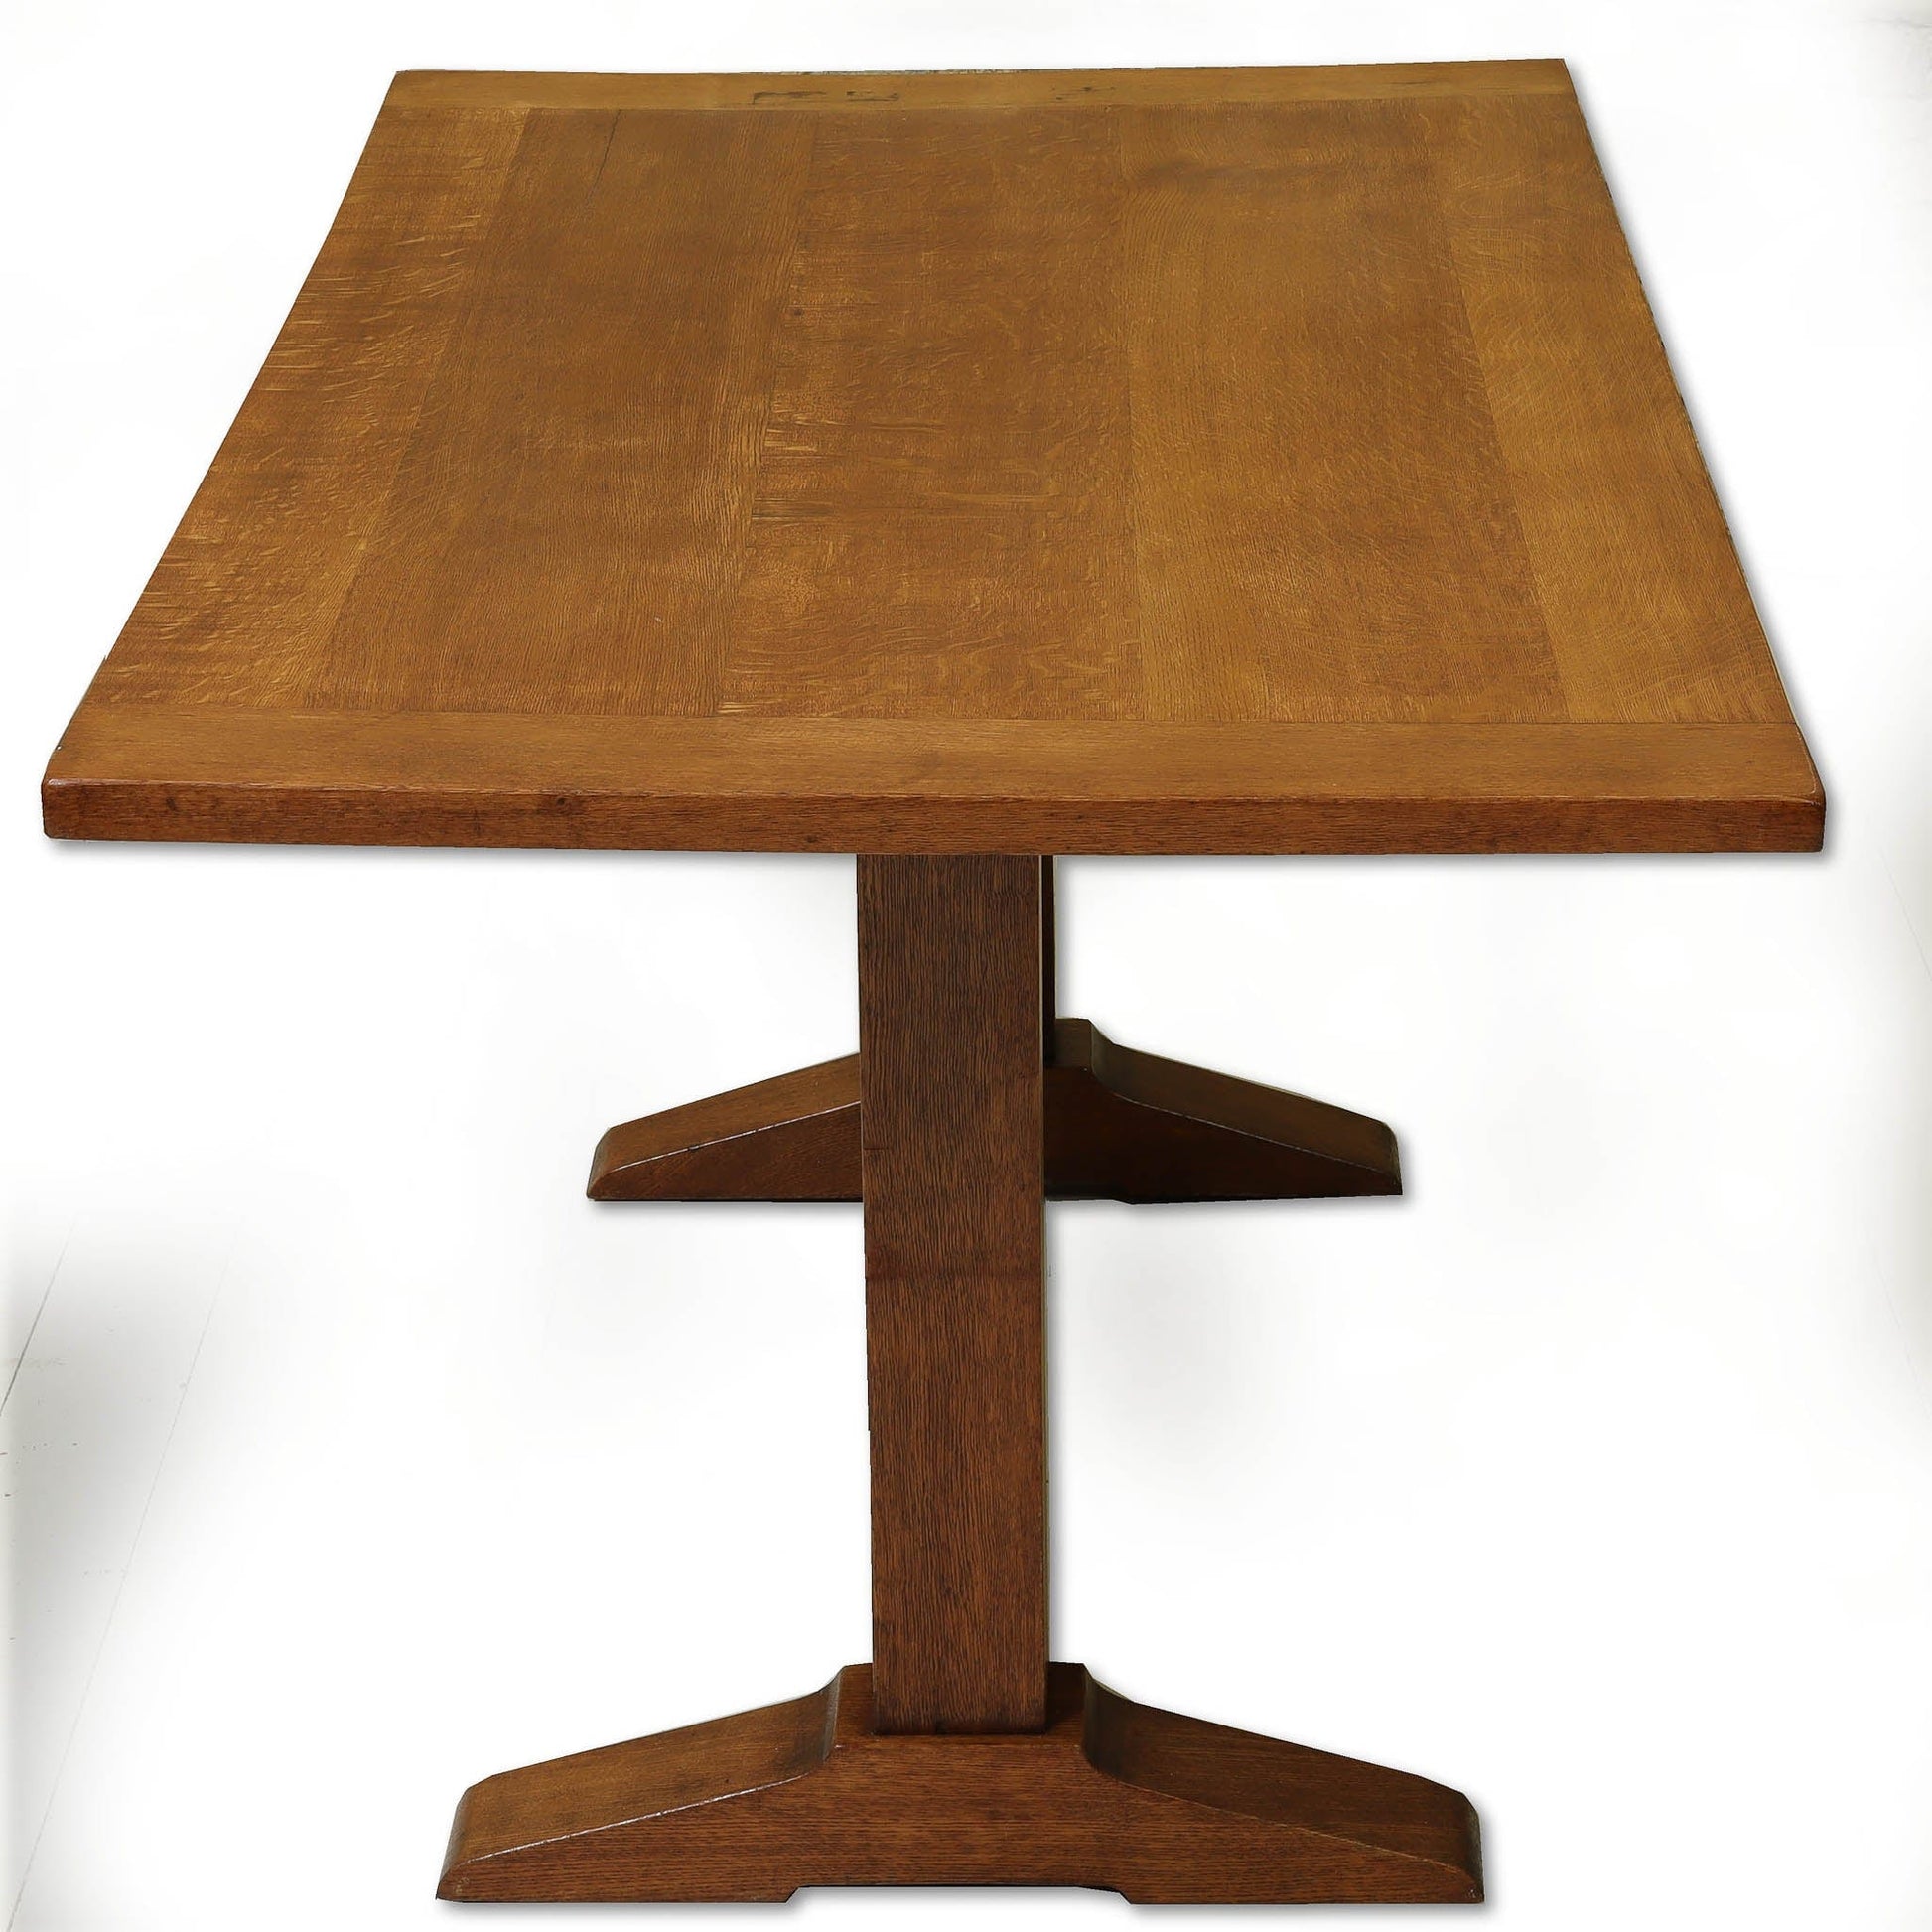 Heal and Co Arts & Crafts Cotswold School English Oak Dining Table c. 1930